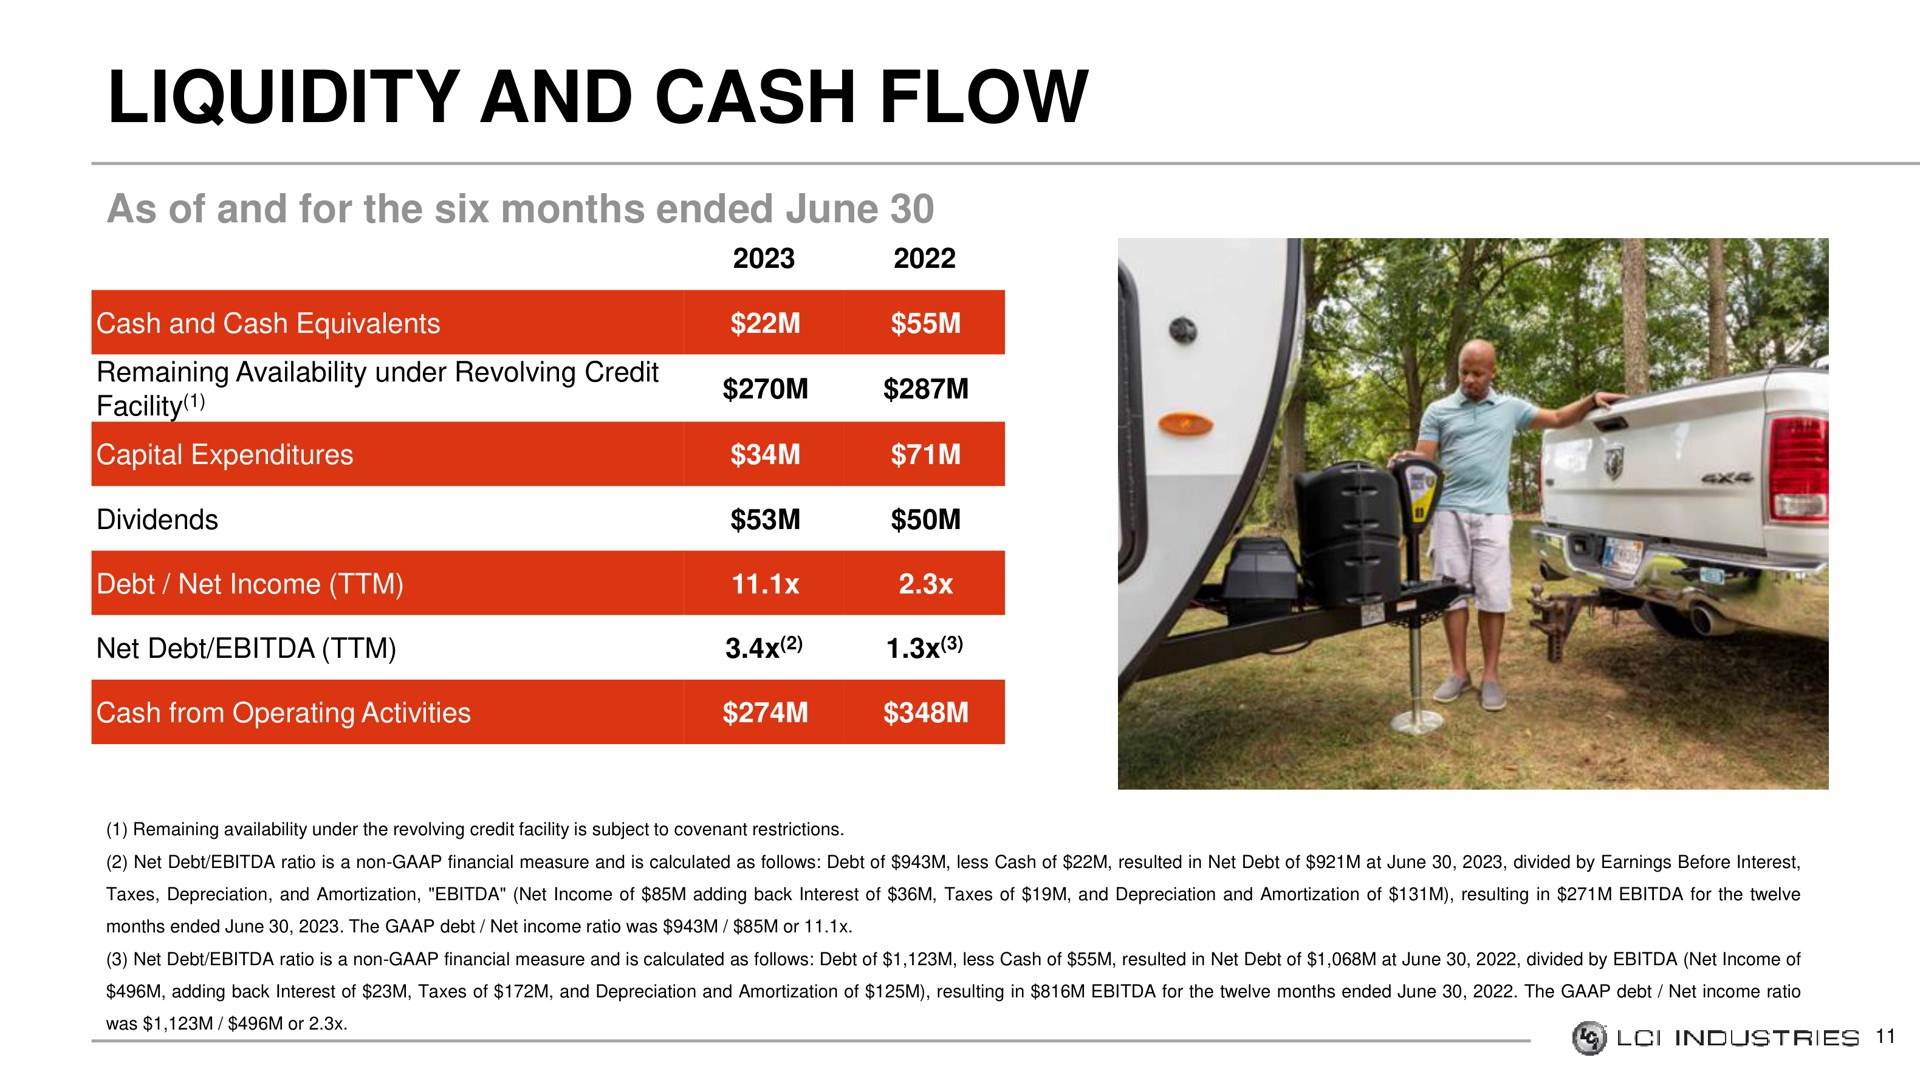 liquidity and cash flow | LCI Industries